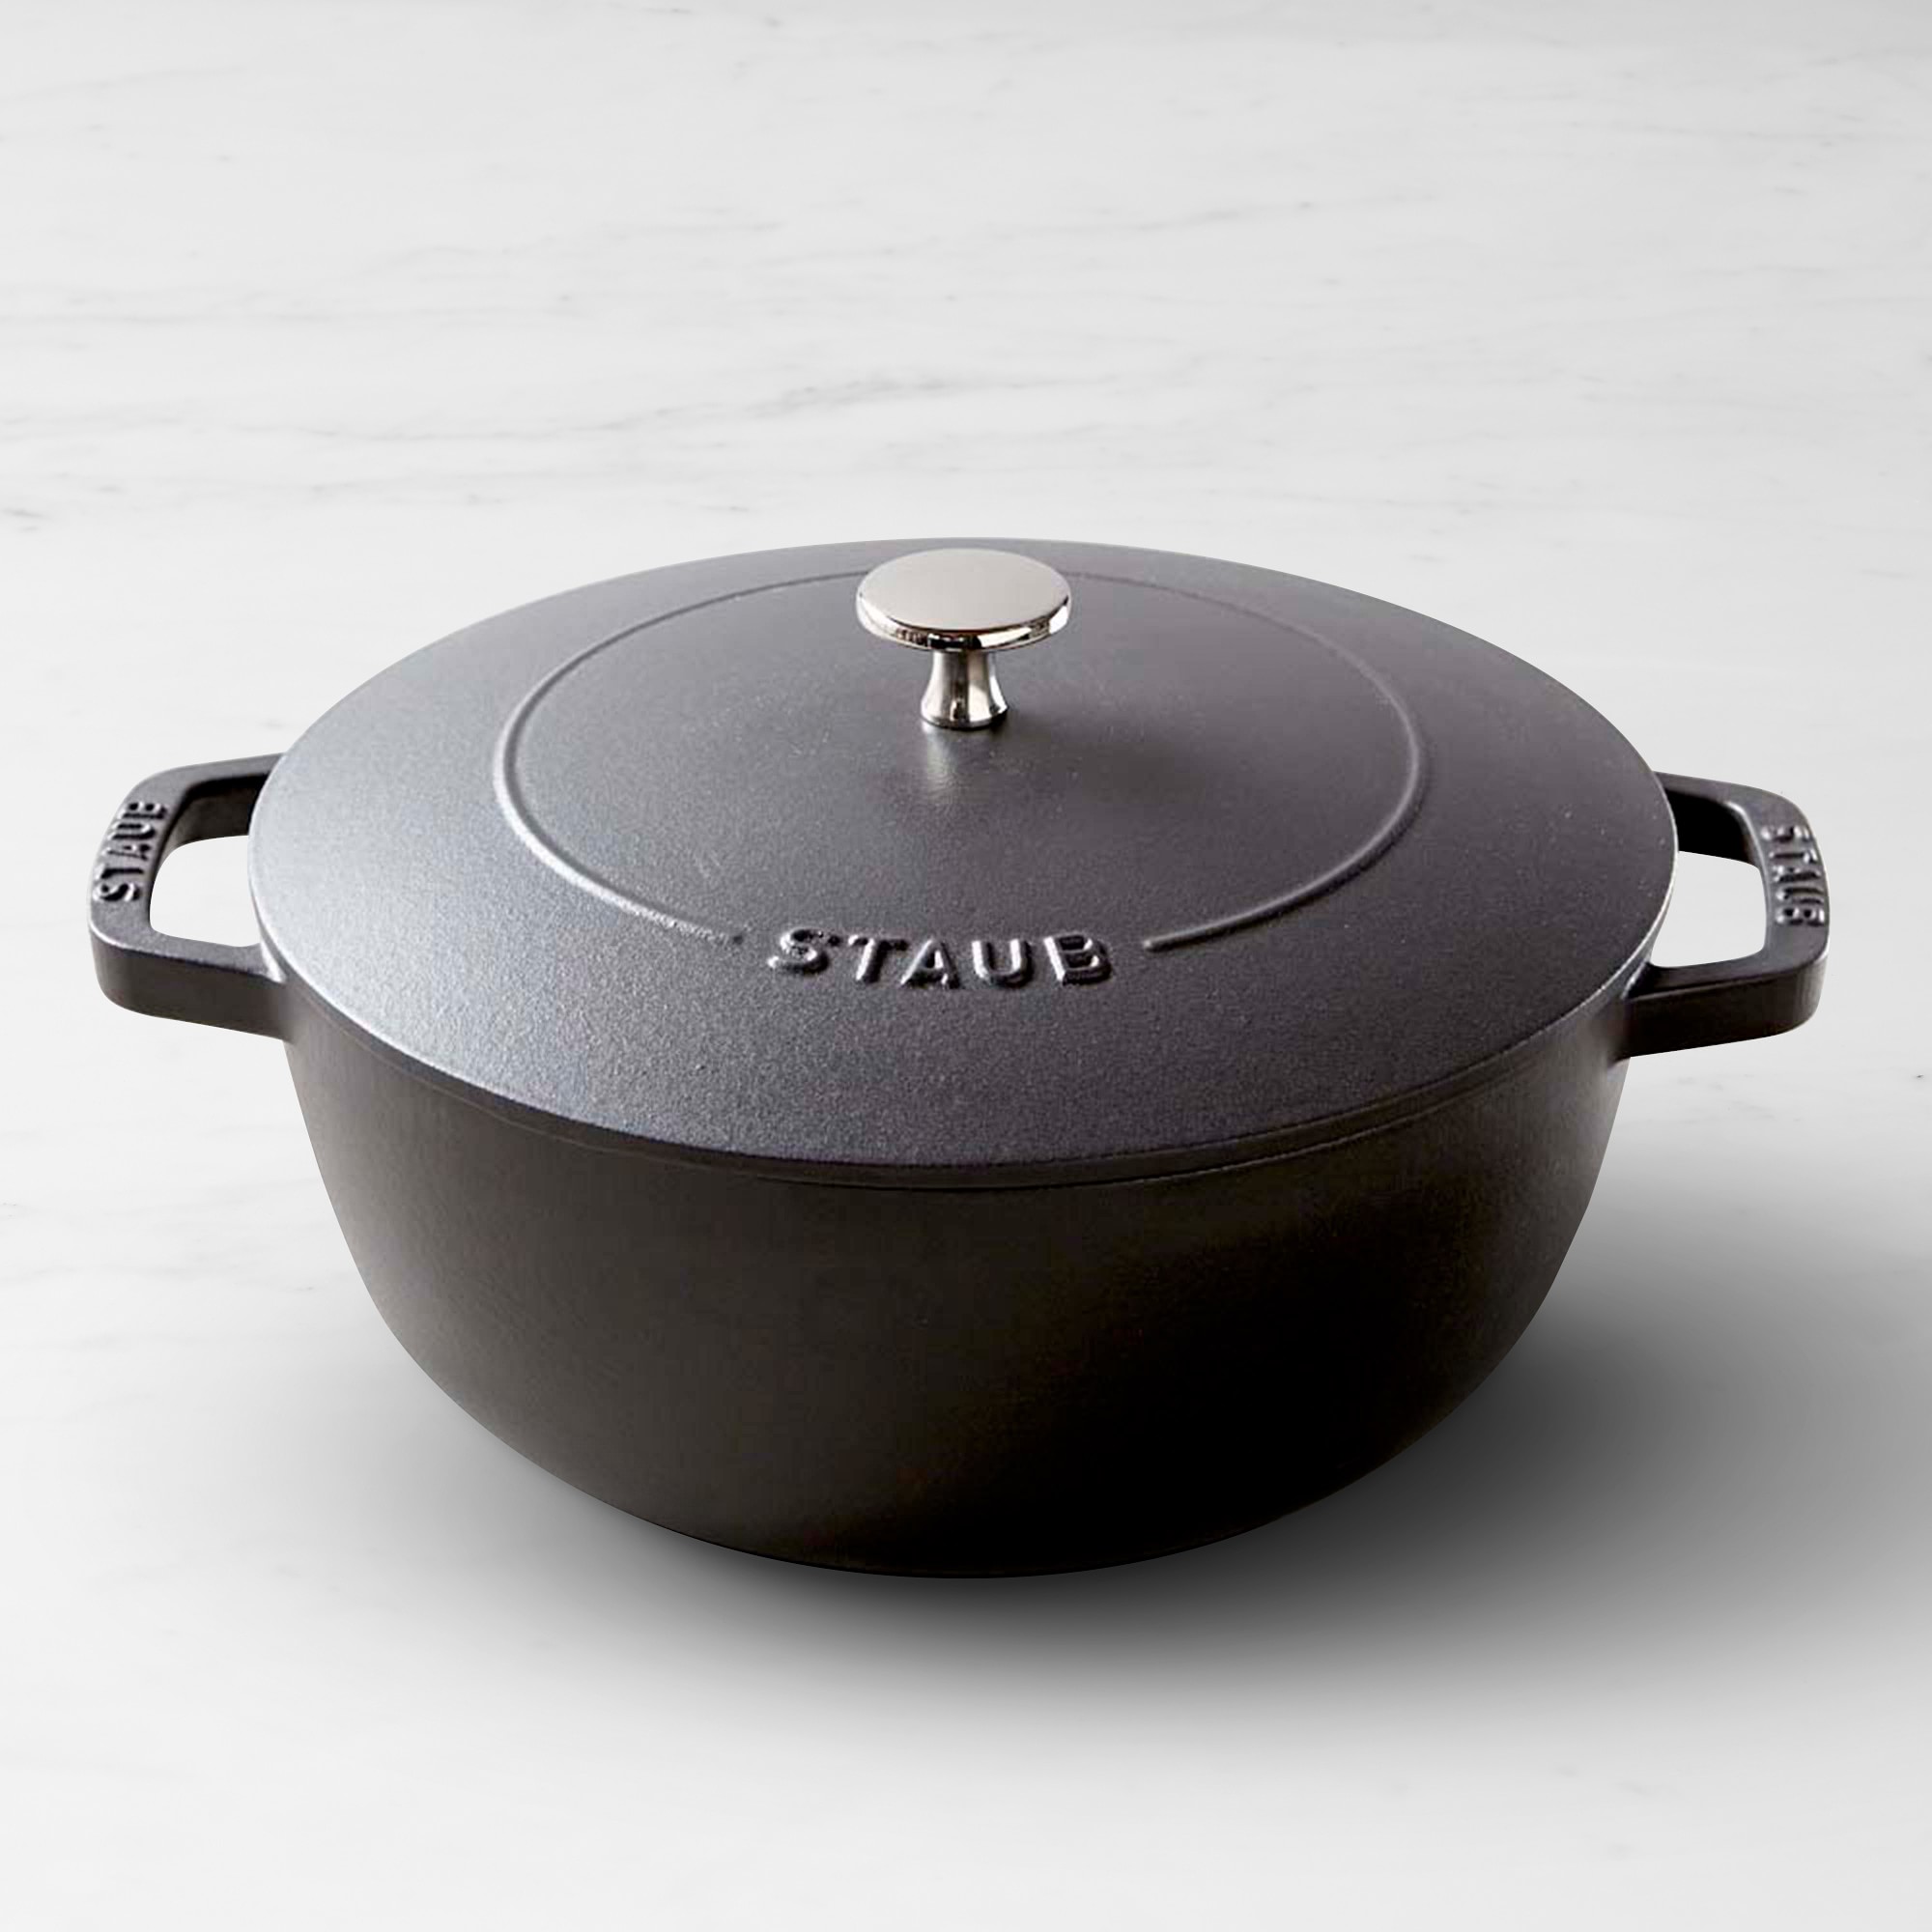 Staub Enameled Cast Iron Essential French Oven